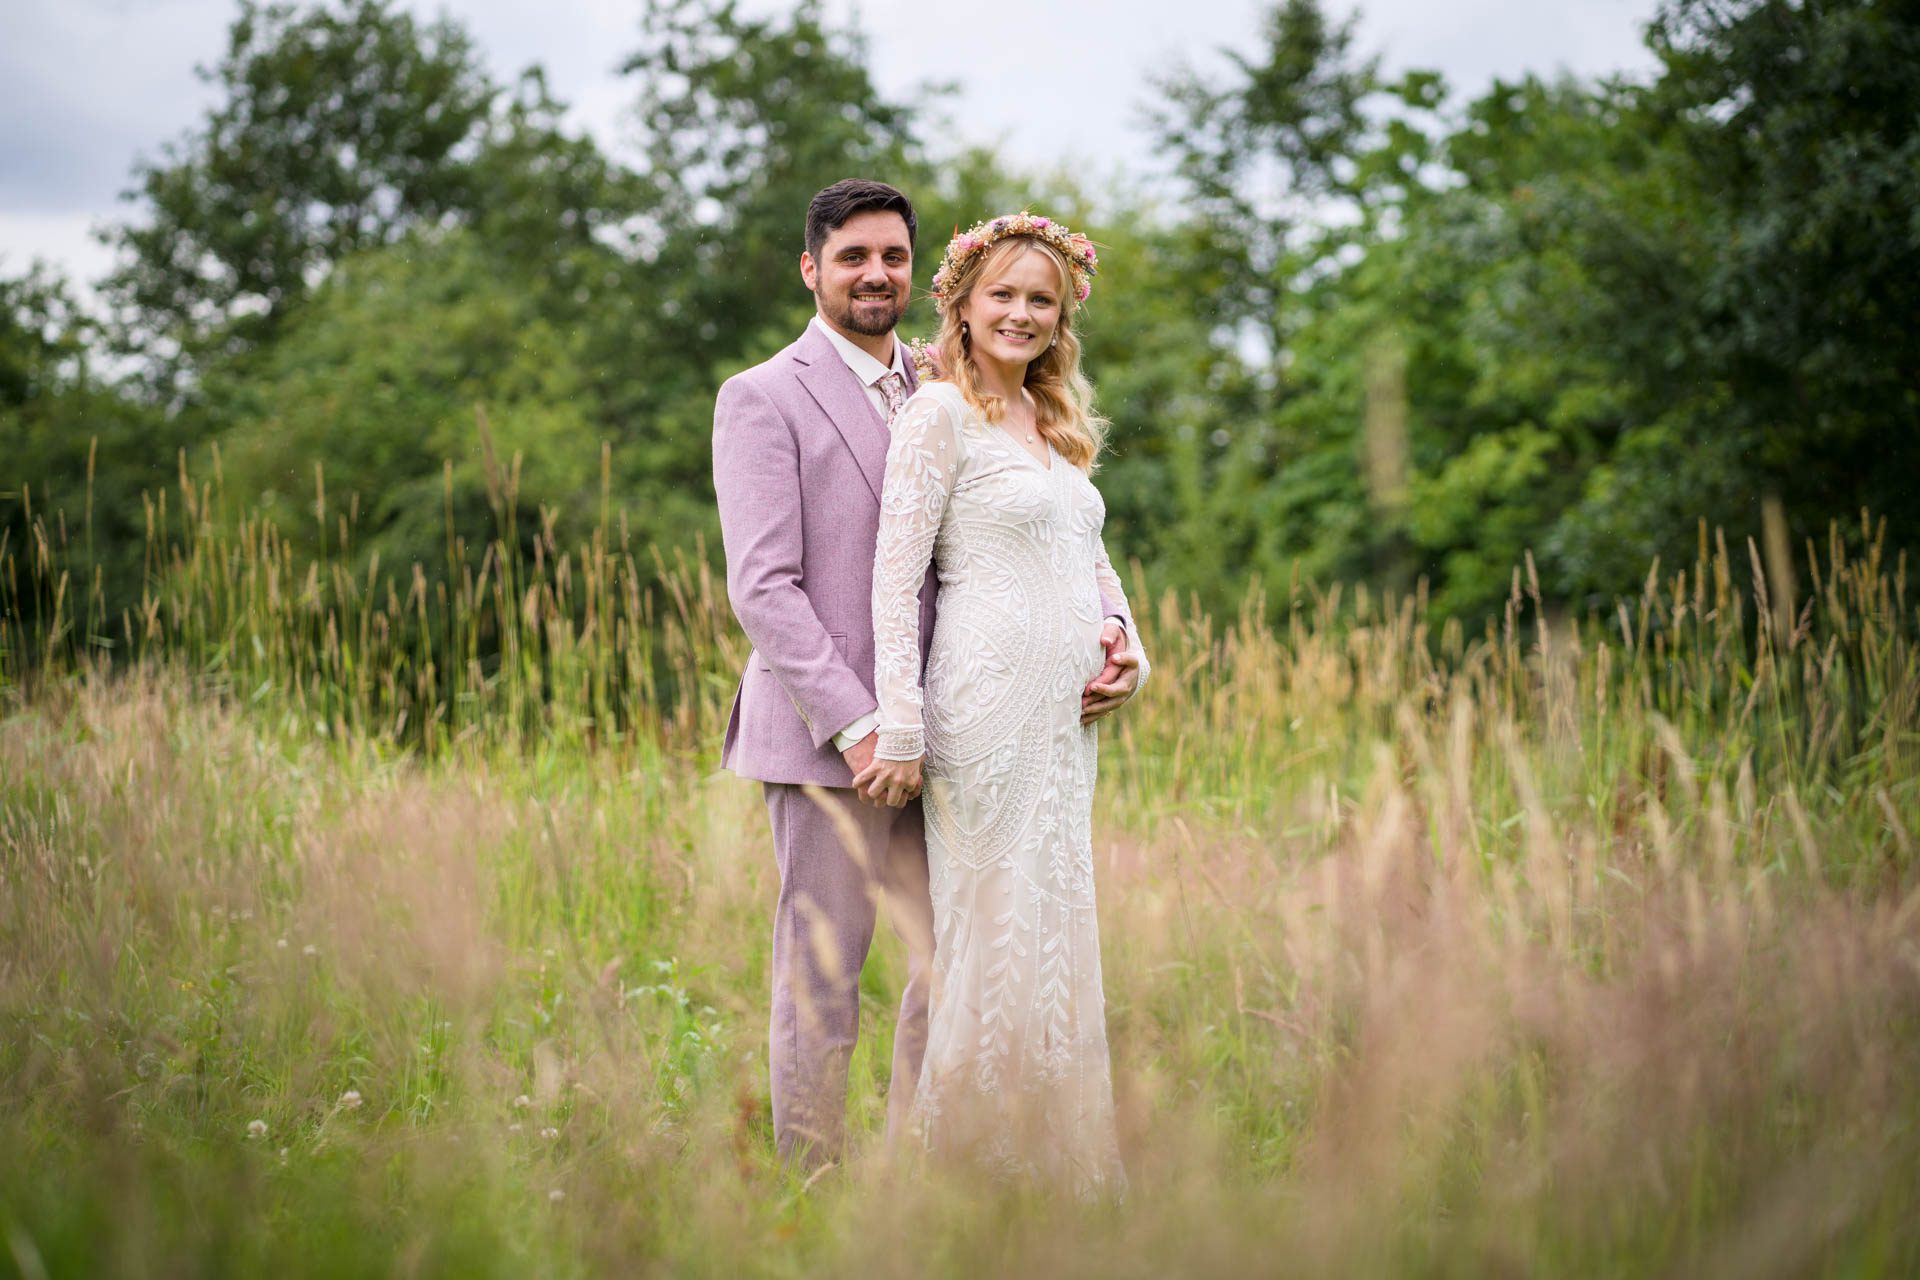 Wedding portrait at Ribble Valley wedding - bride and groom hugging in field of long grass